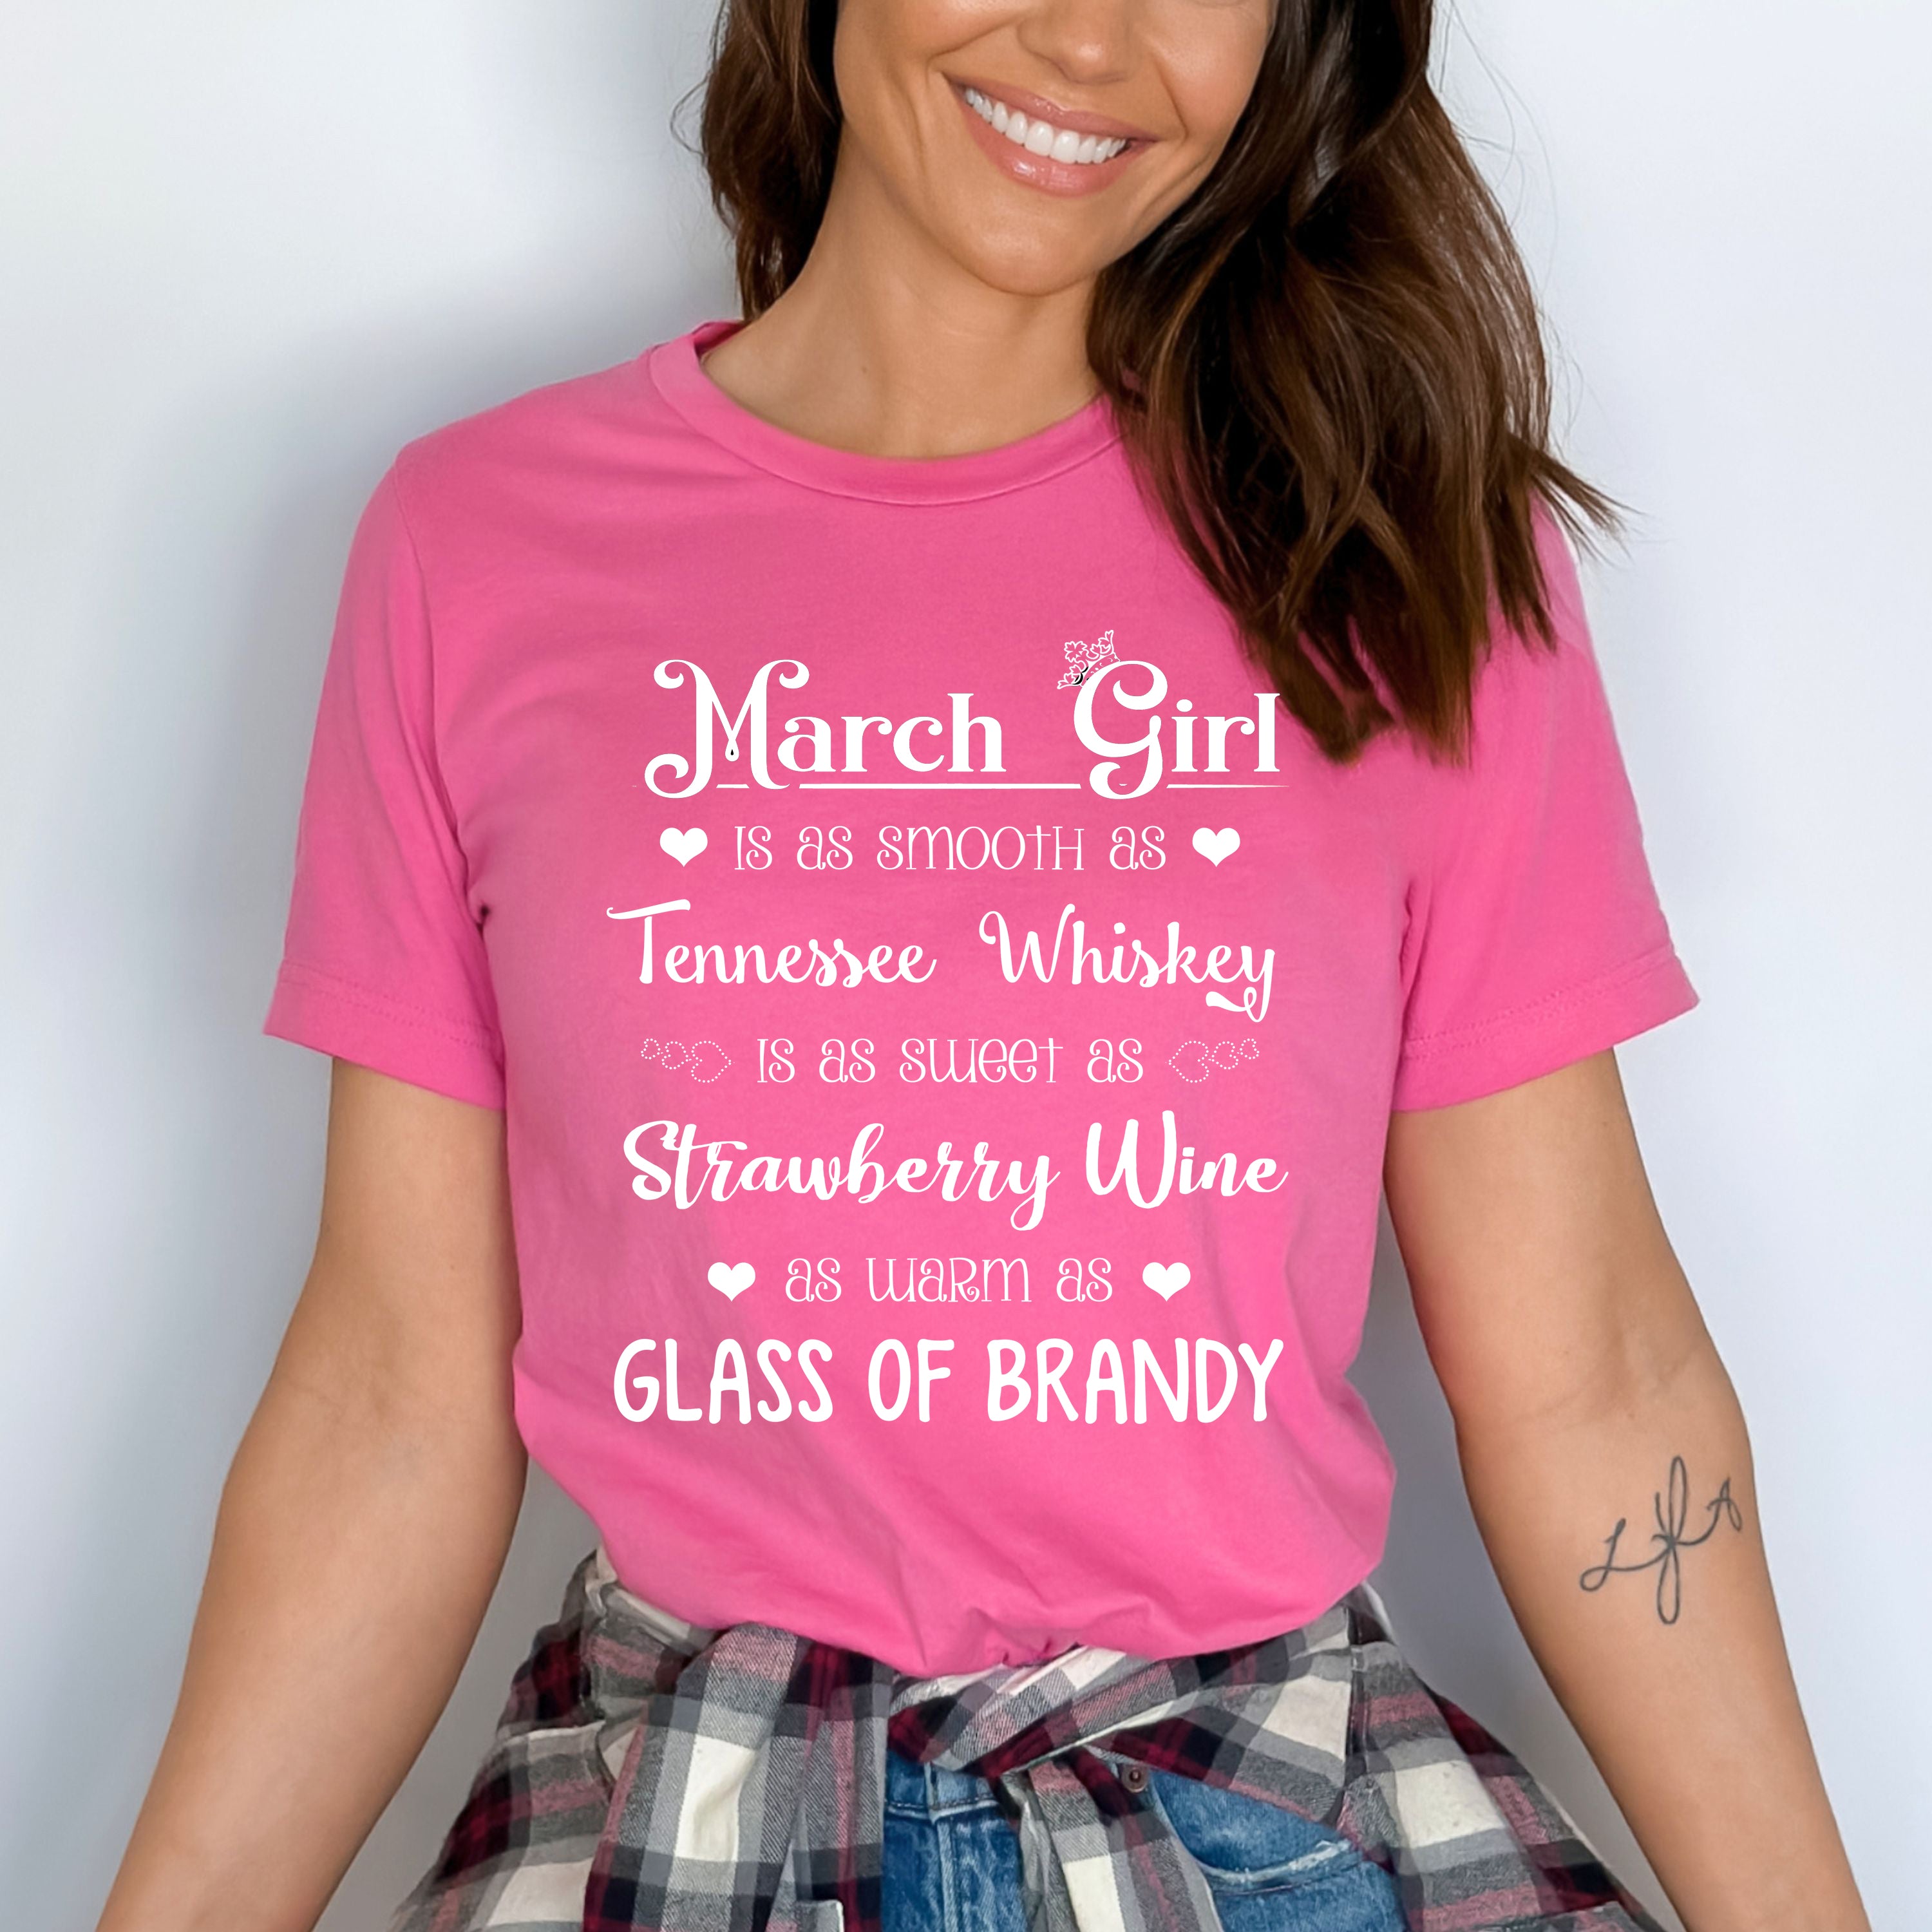 "March Girl Is As Smooth As Whiskey.........As Warm As Brandy"